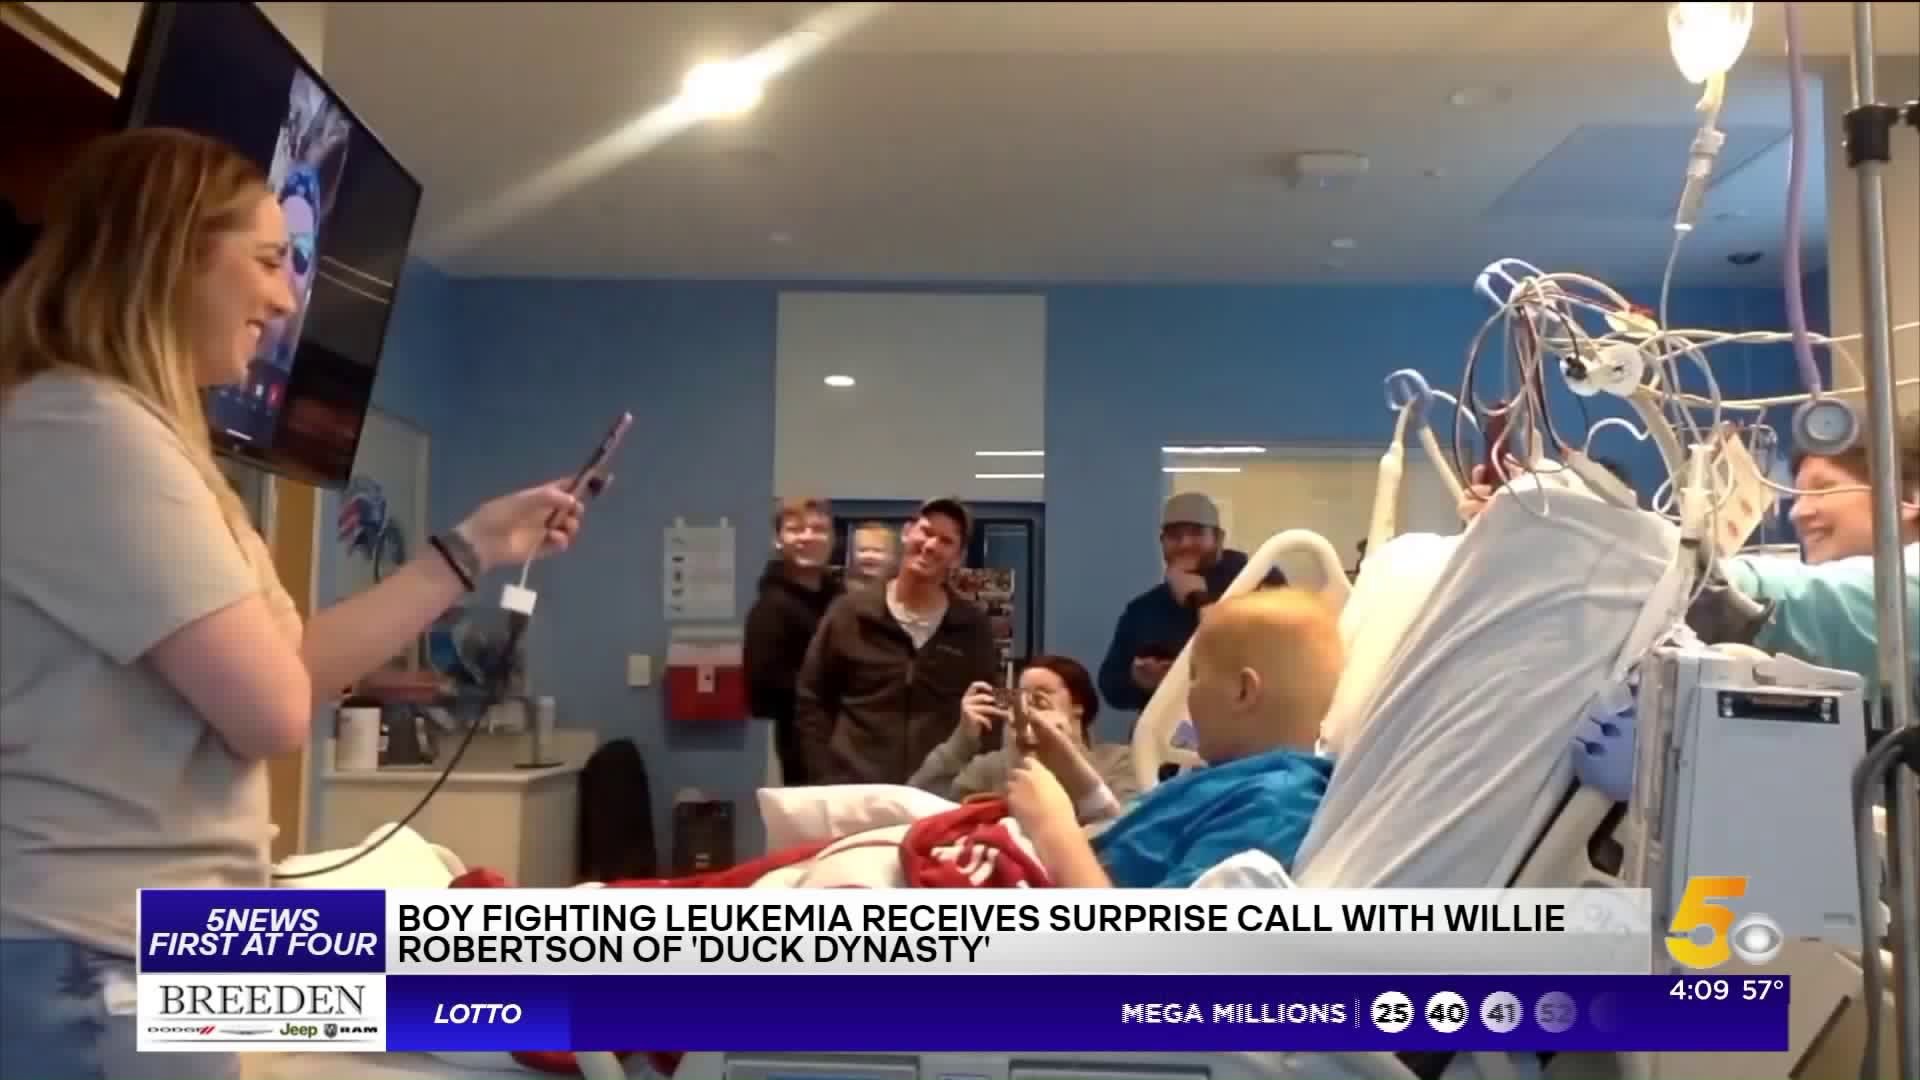 Boy Fighting Leukemia Surpised With Call From Willie Robertson